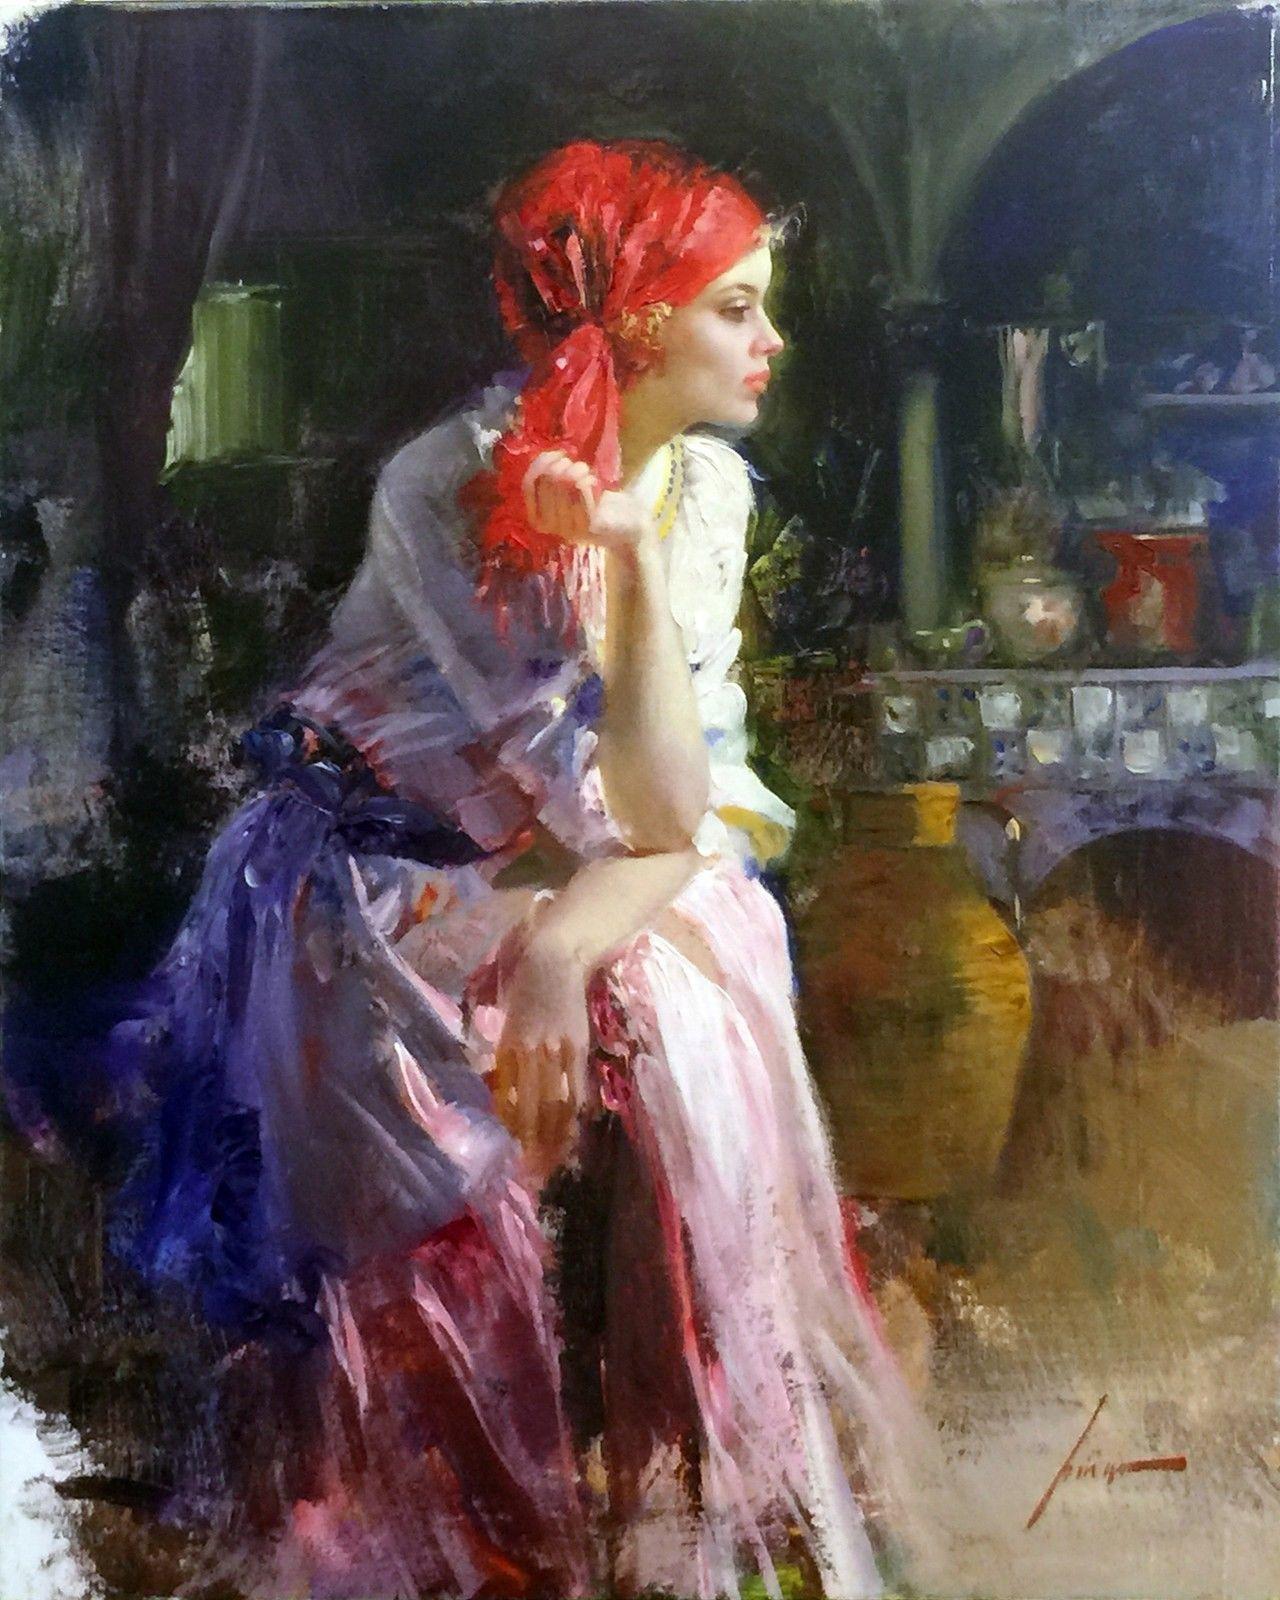 Pino Daeni Portrait Print - LOST IN THOUGHT (HAND EMBELLISHED)